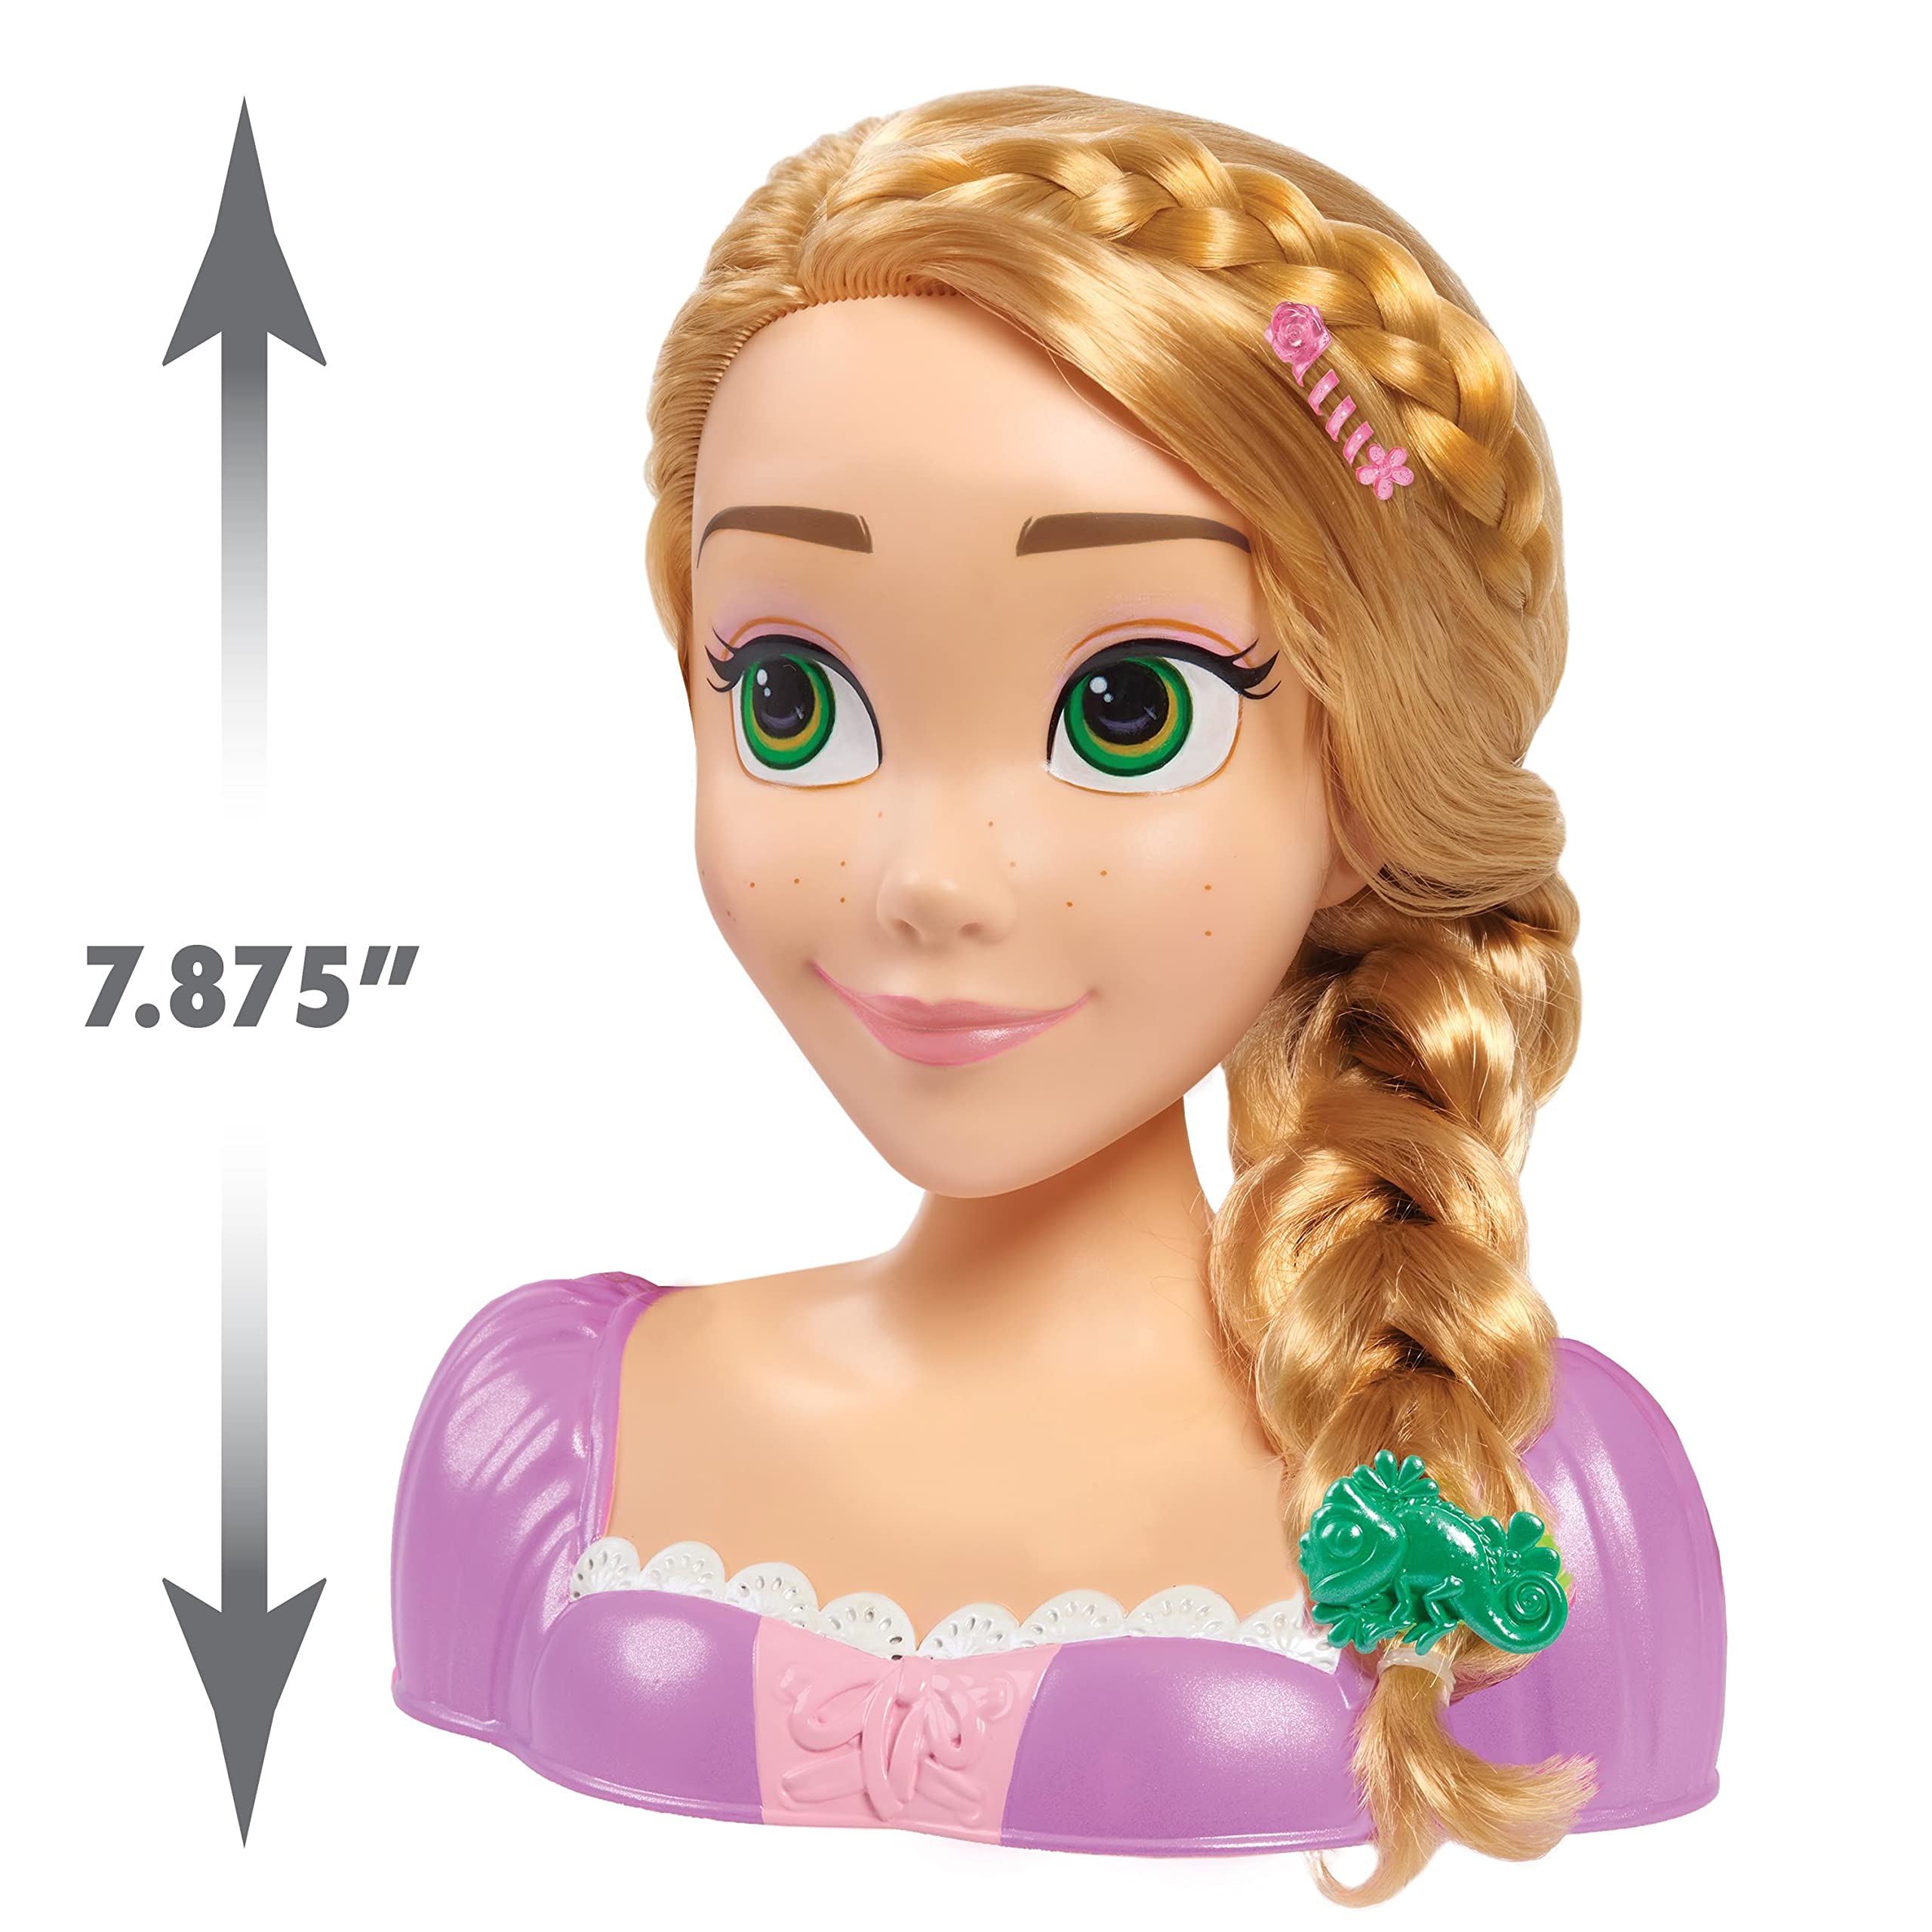 Disney Princess Rapunzel Styling Head, 18-pieces, Pretend Play, Officially Licensed Kids Toys for Ages 3 Up, Gifts and Presents by Just Play